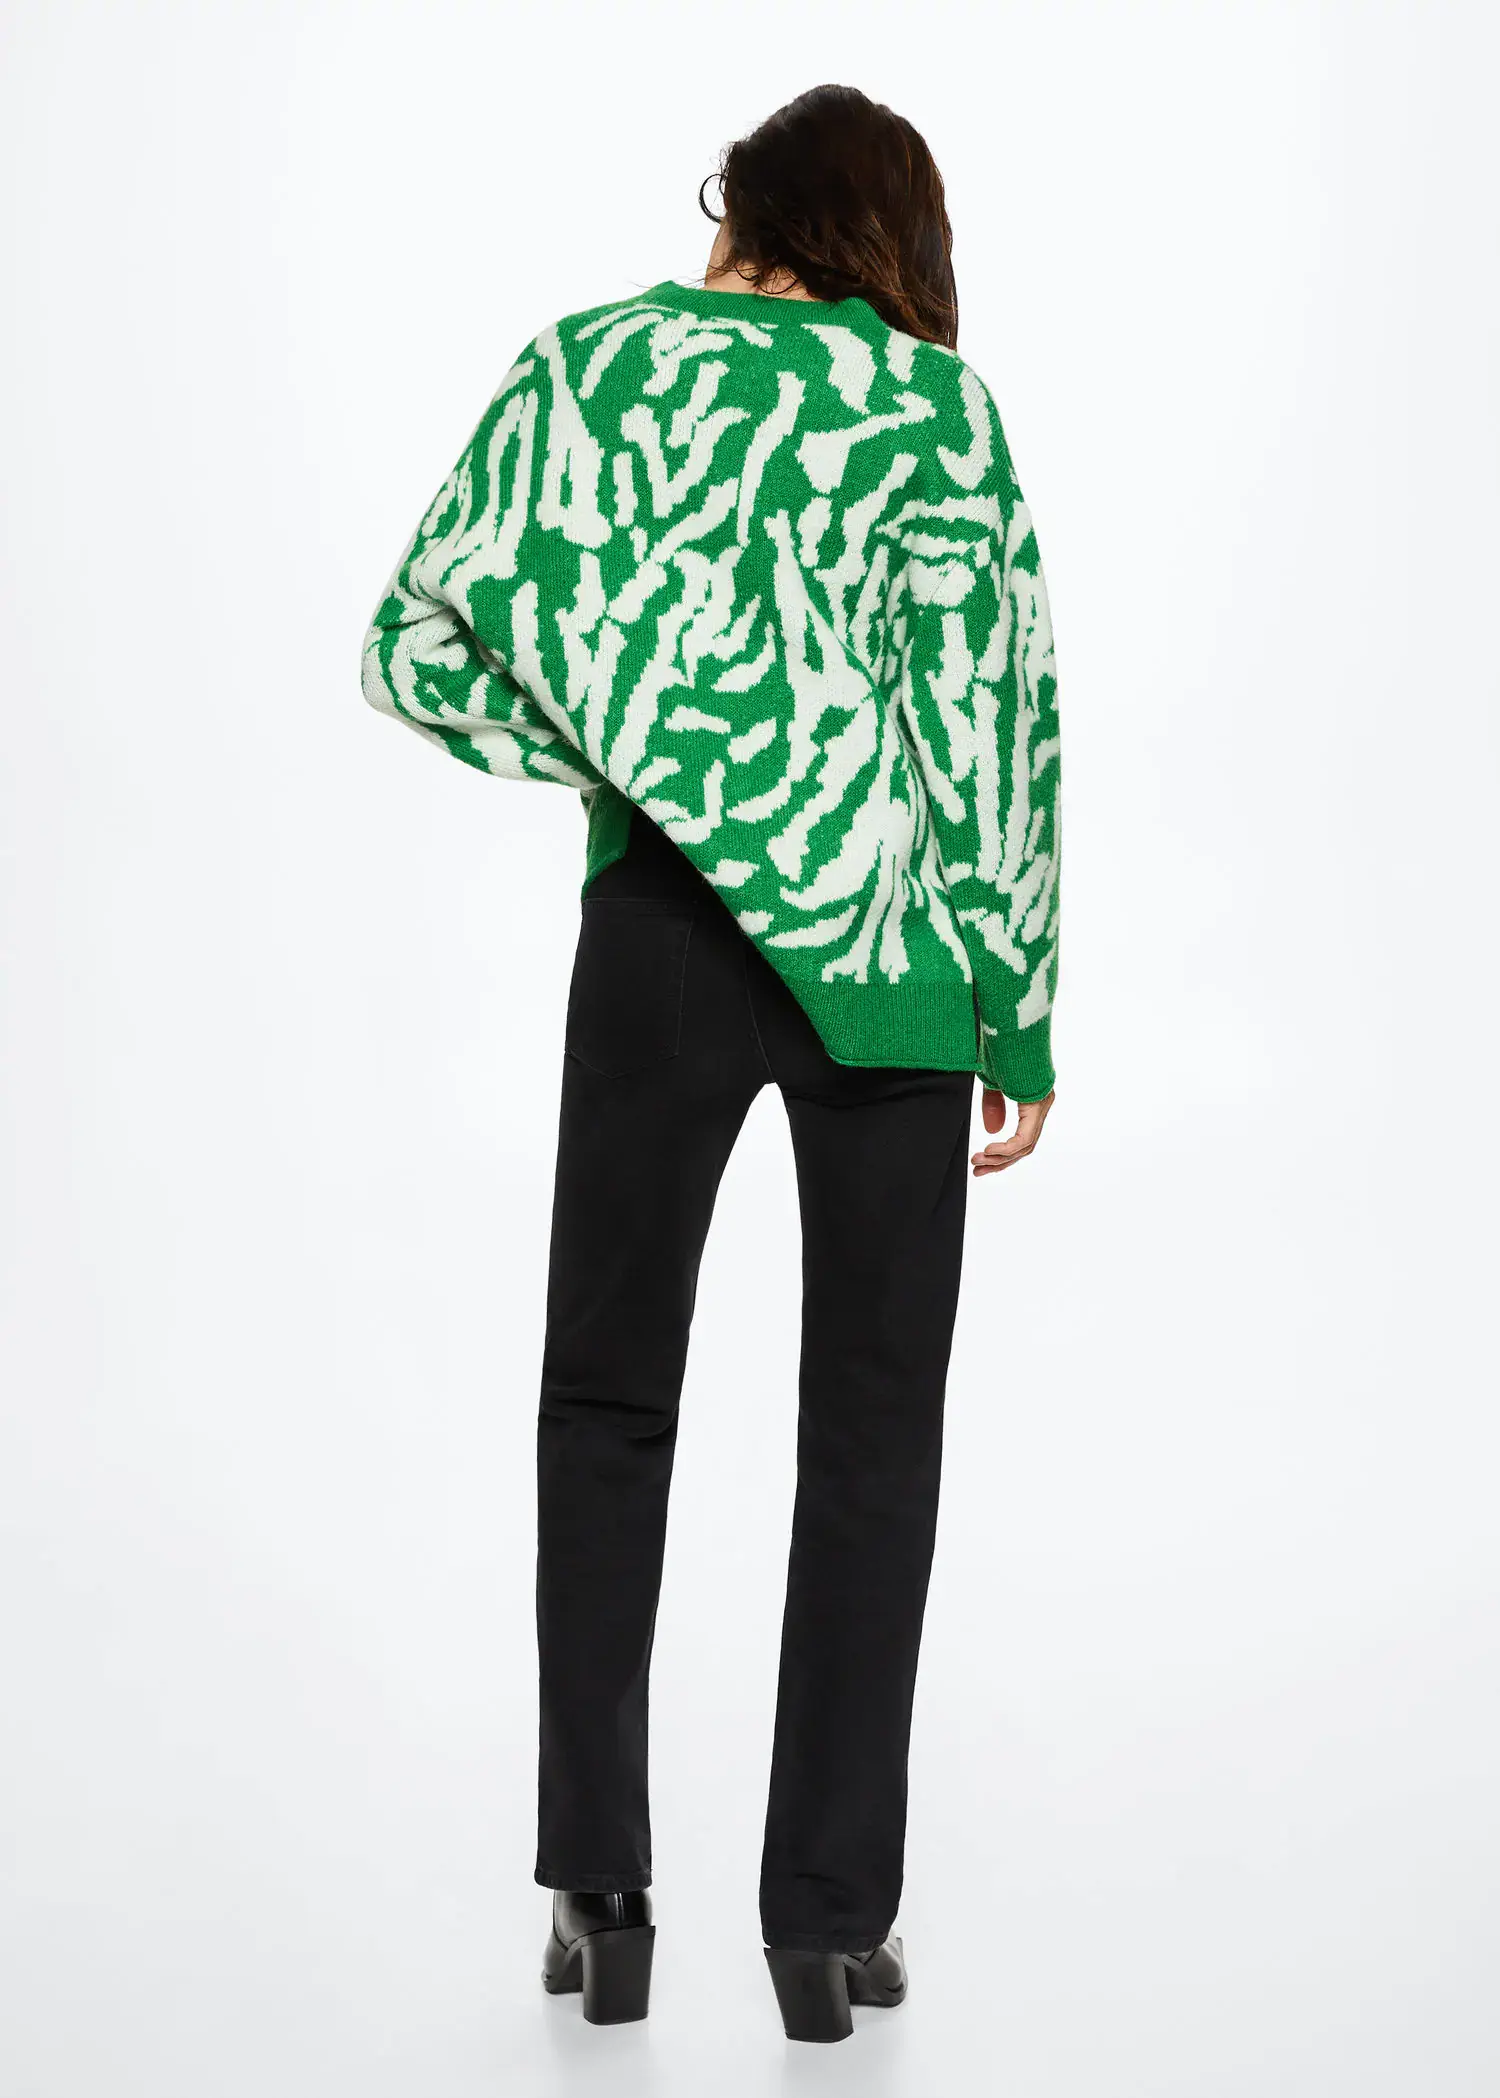 Mango Animal print knit jersey. a person wearing a green and white sweater. 